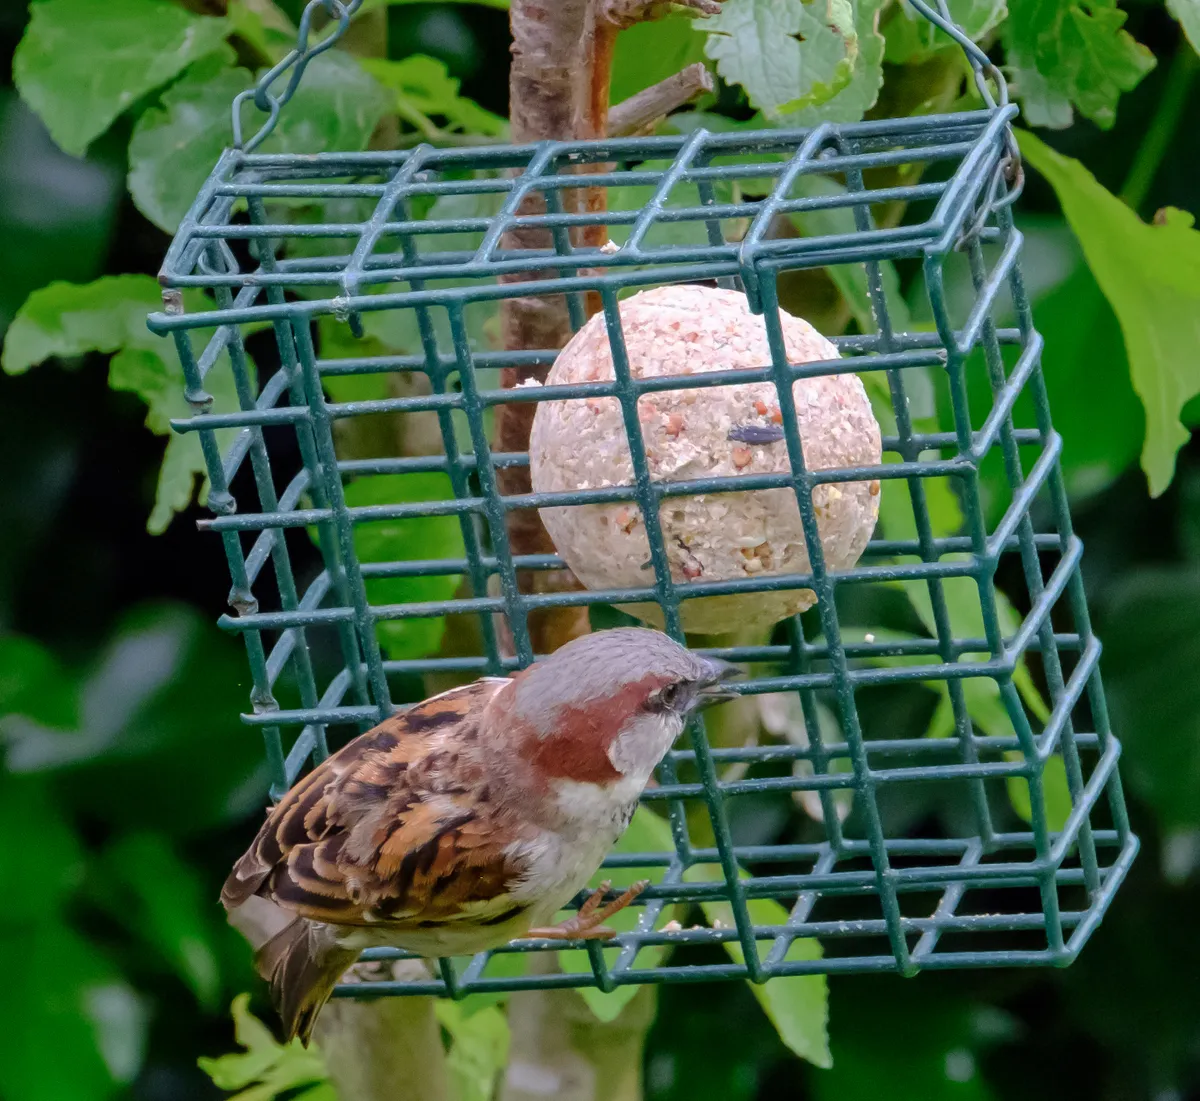 Adult sparrow seen perched on a bird feeder containing a high energy fat ball. Taken in early summer, the birds are feeding there out of view chicks.